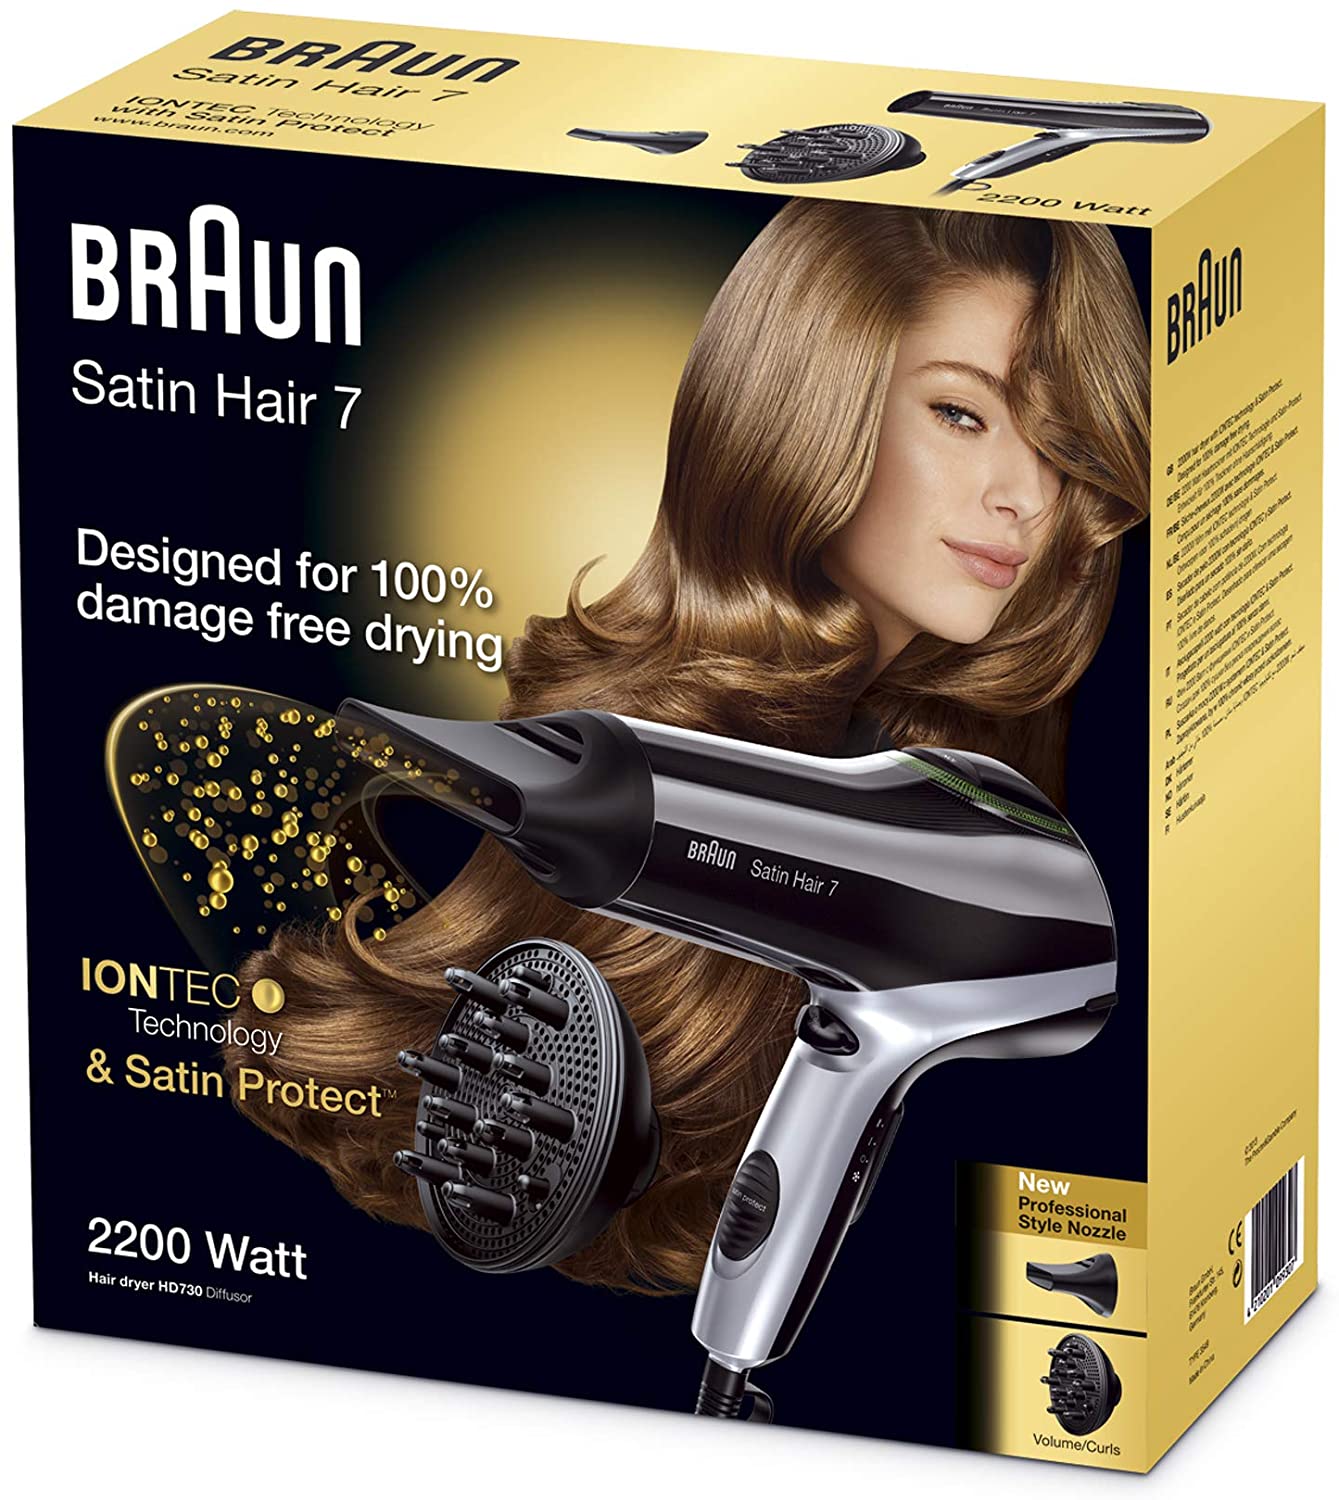 Braun Satin Hair 7 Hd730 Hair Dryer With Diffuser And Iontec Technology -  Makkah Pharmacy